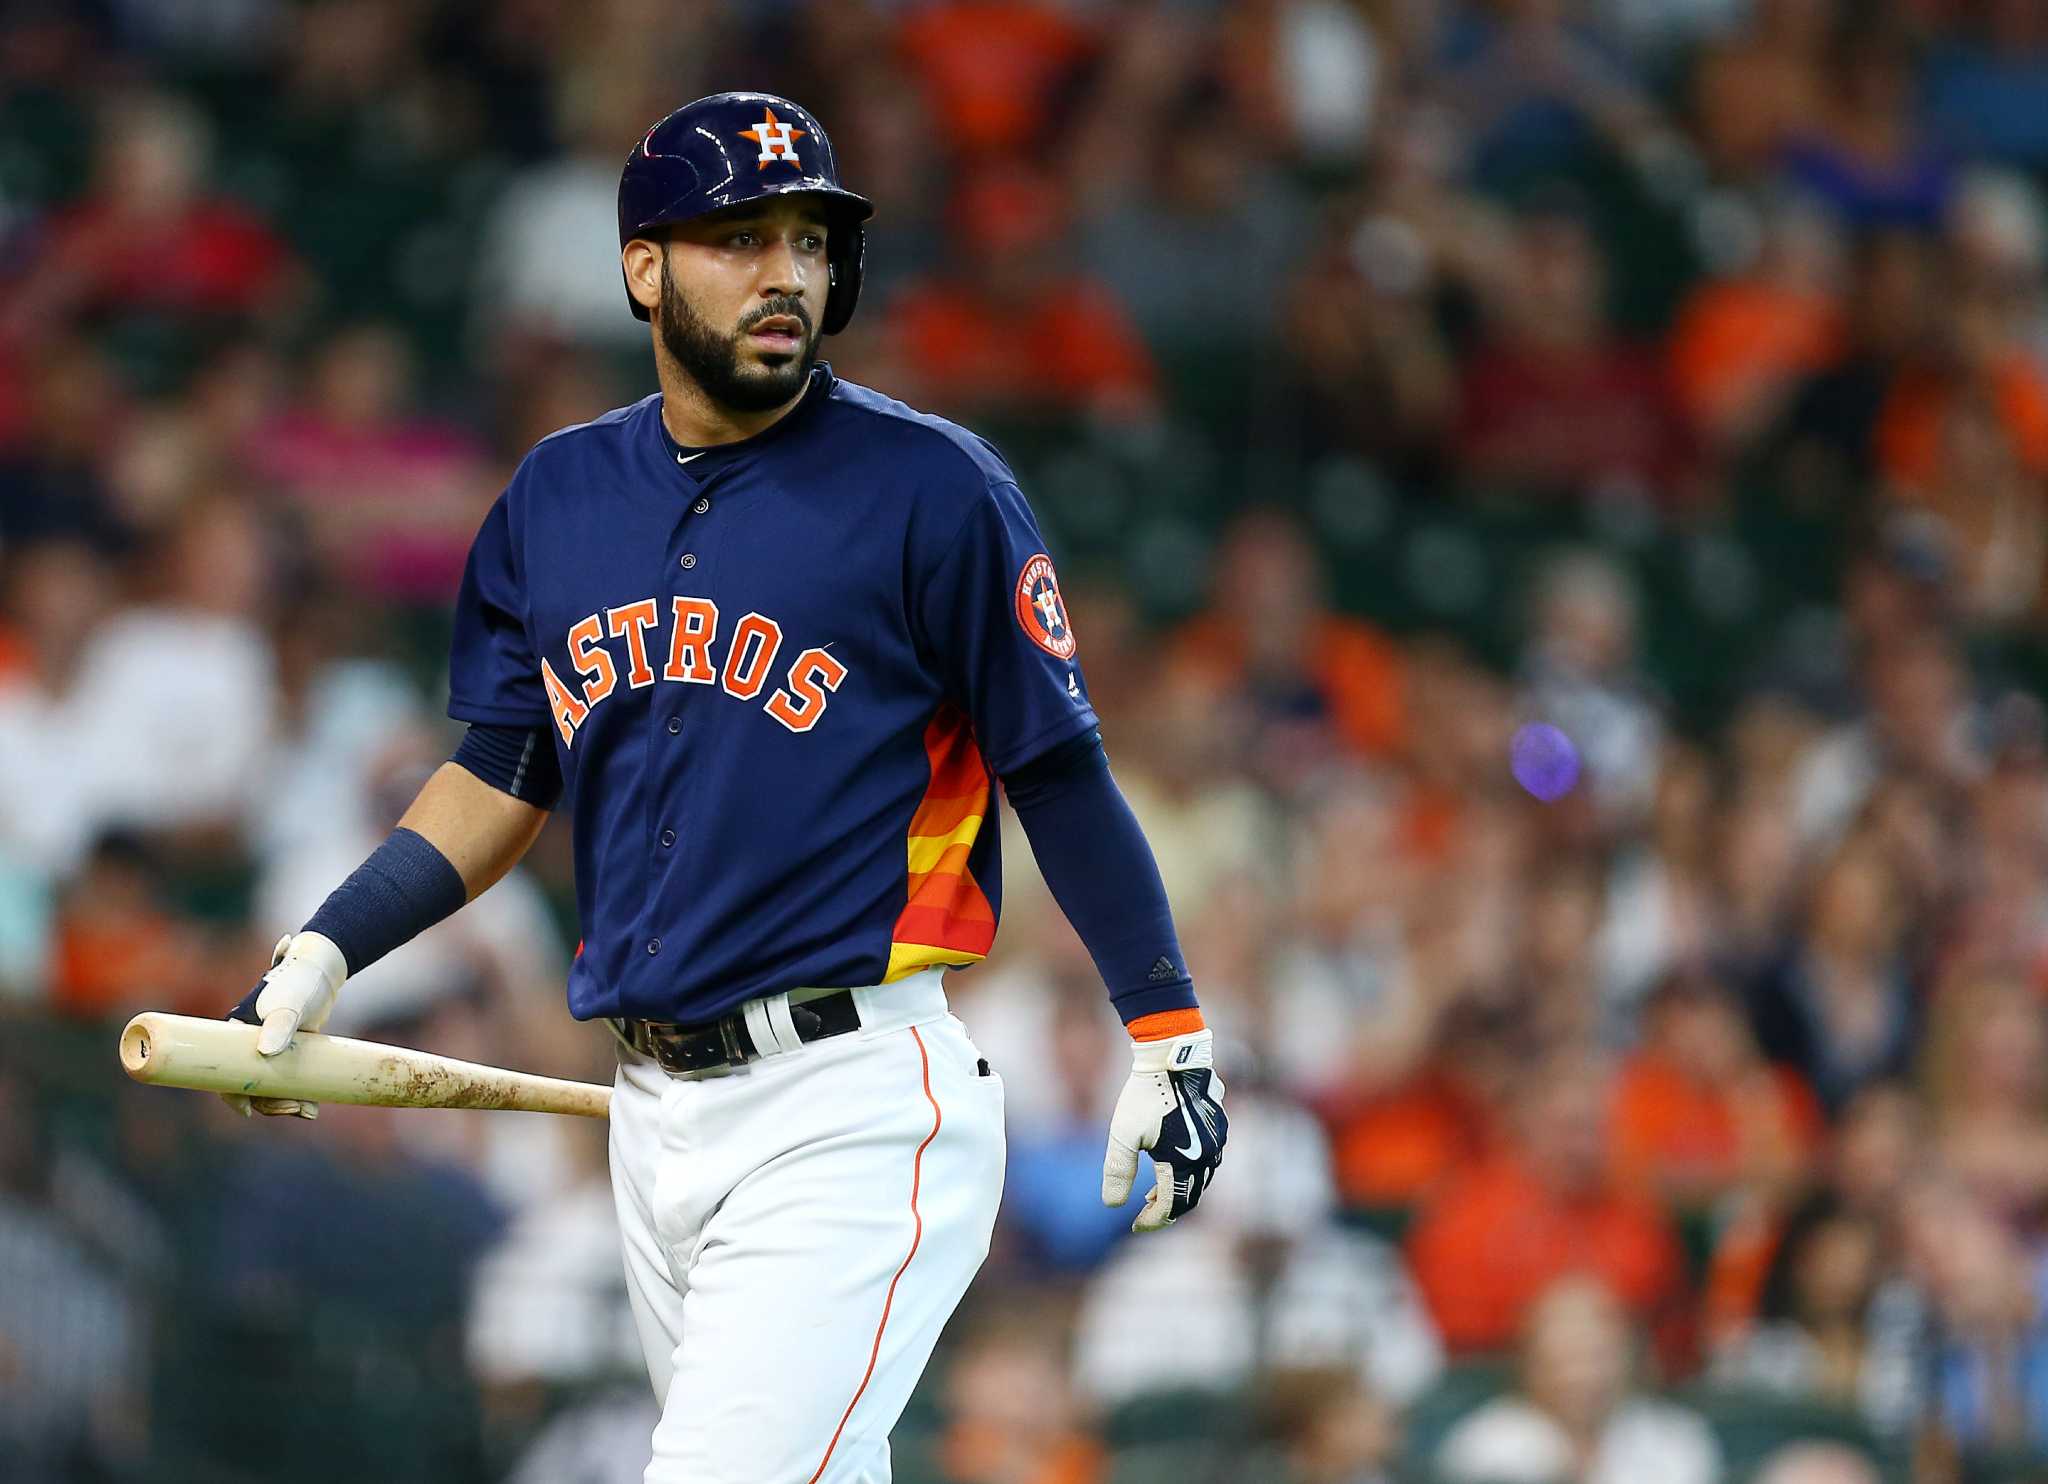 Get a peek at the Houston Astros Player's Weekend uniforms and nicknames